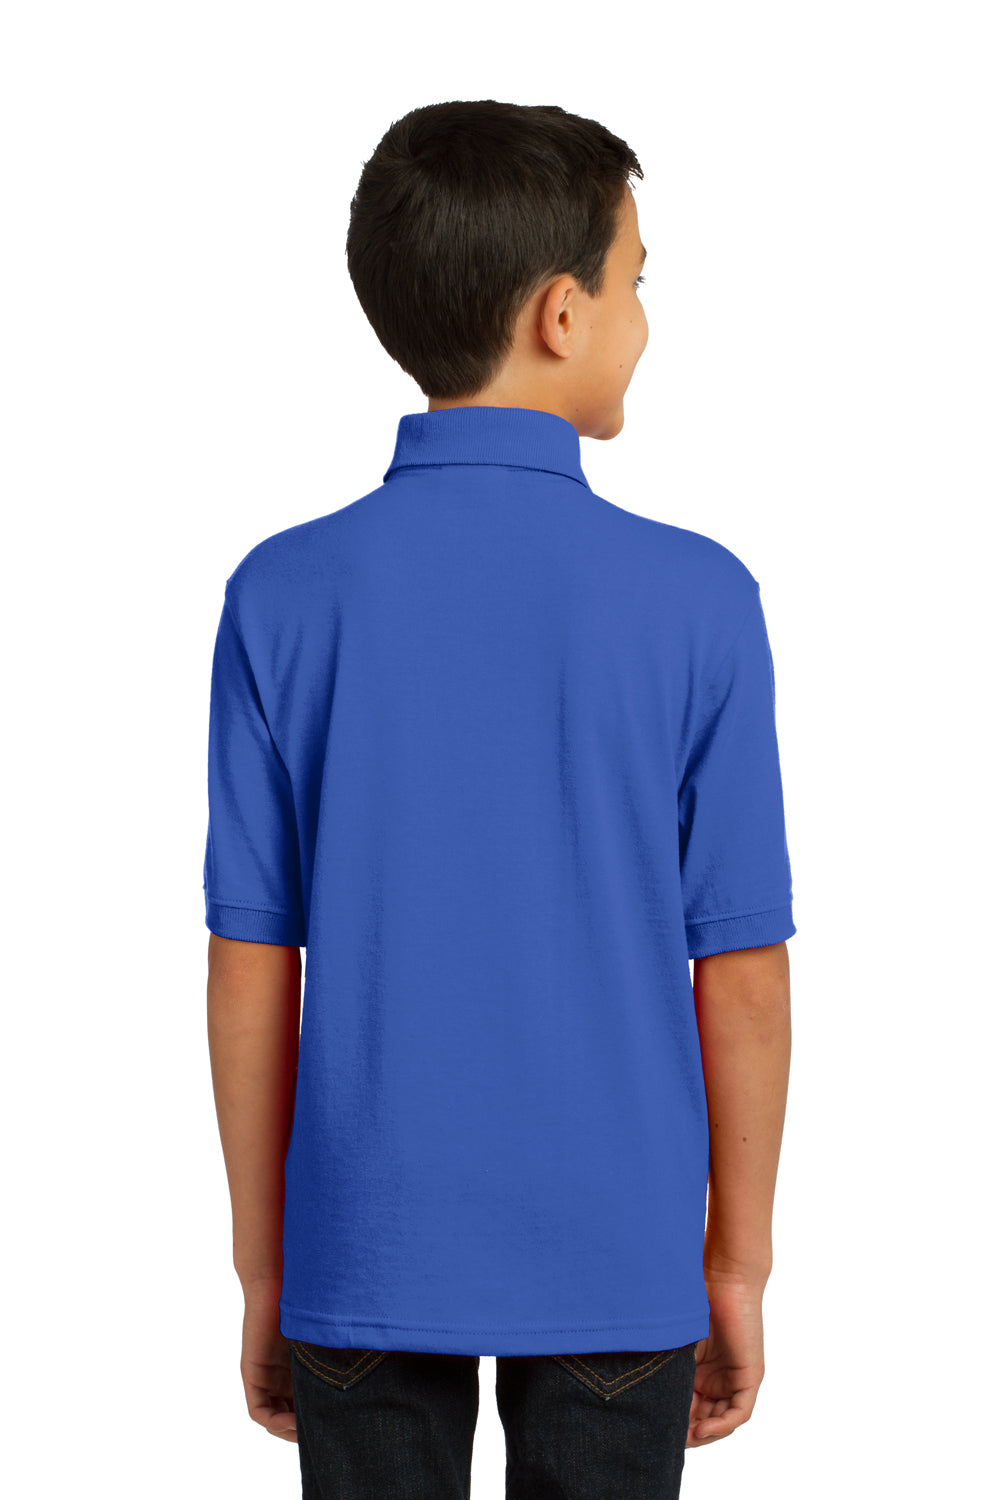 Port & Company KP55Y Youth Core Stain Resistant Short Sleeve Polo Shirt Royal Blue Back